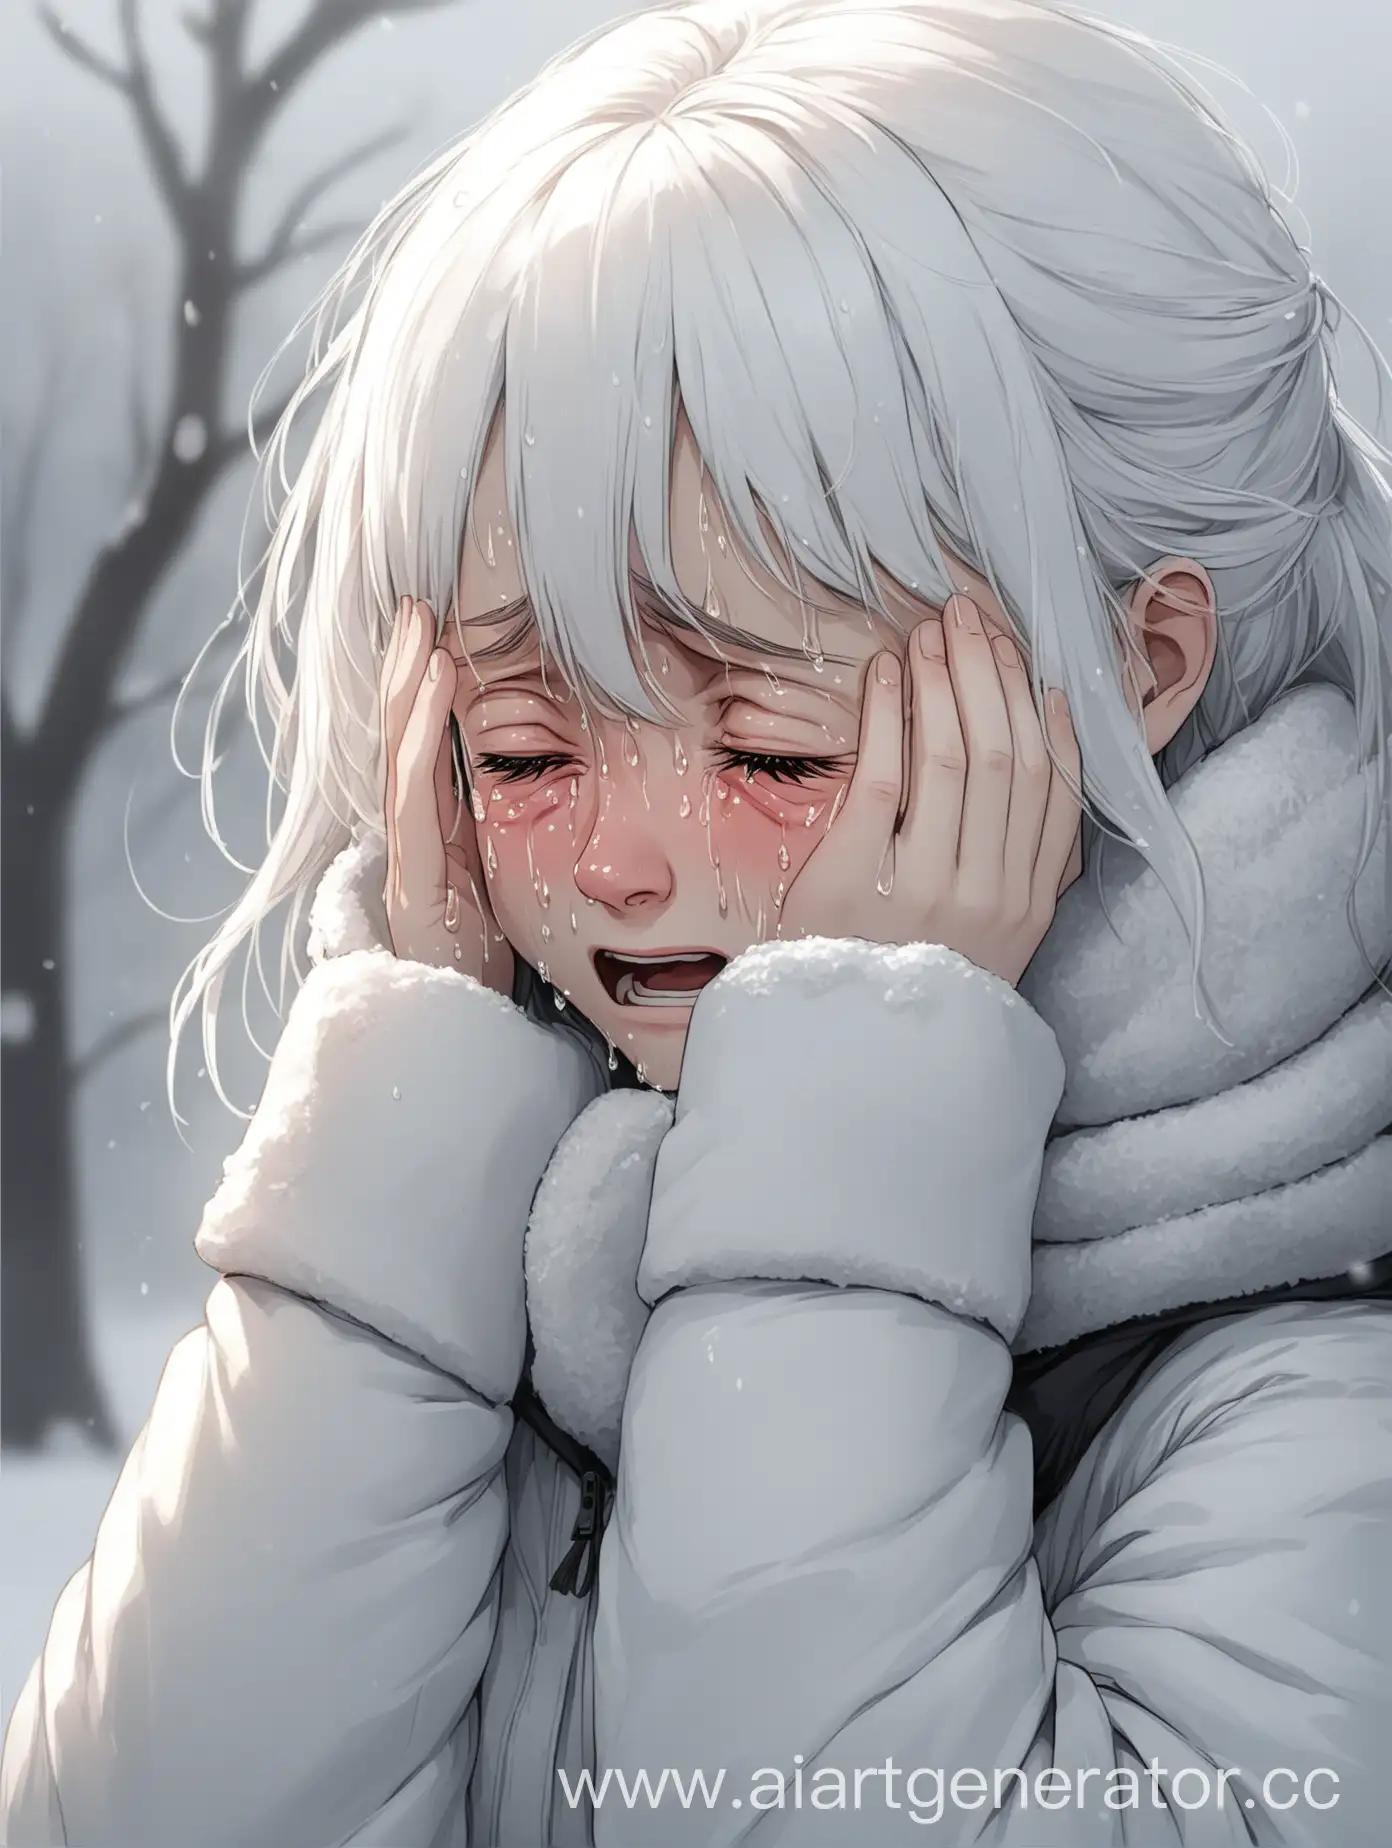 Crying-Girl-in-Winter-Attire-with-White-Hair